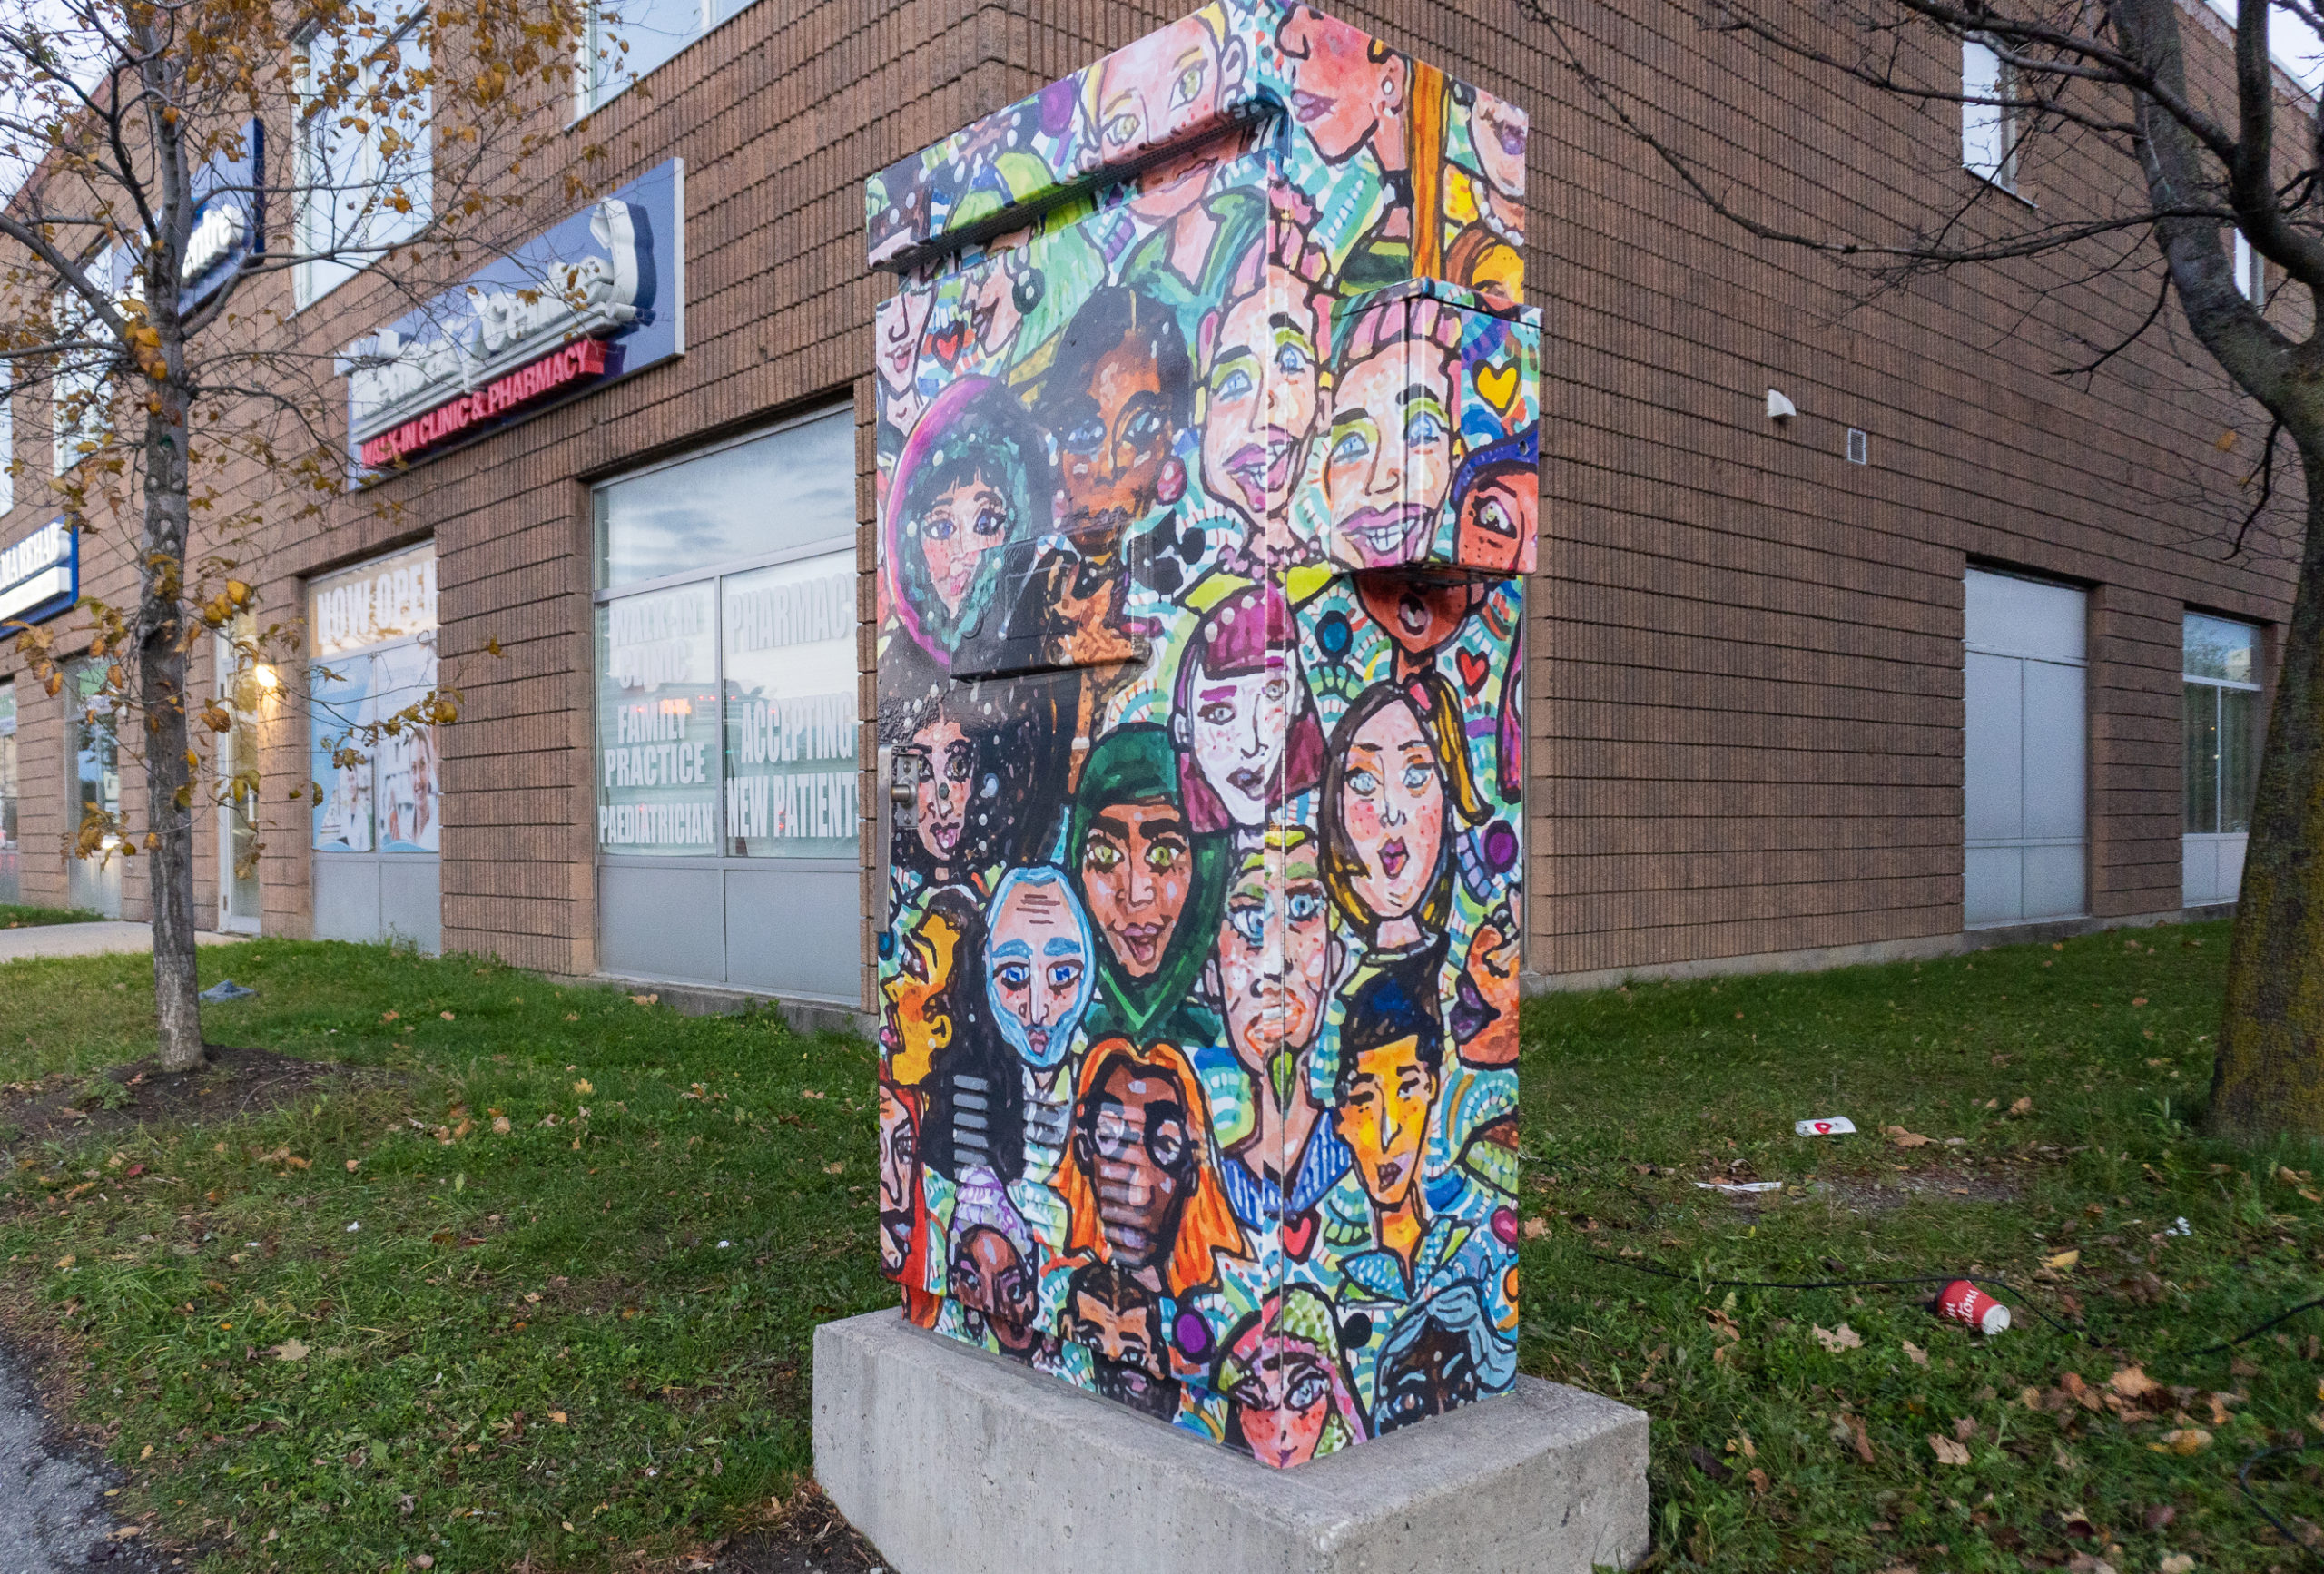 Photo of a traffic box in Brampton that features the artwork of Annmarie Claudette. The art shows a collage of colourful portraits with bold patterning. The box is sitting on a grassy area next to the building of a pharmacy and trees.